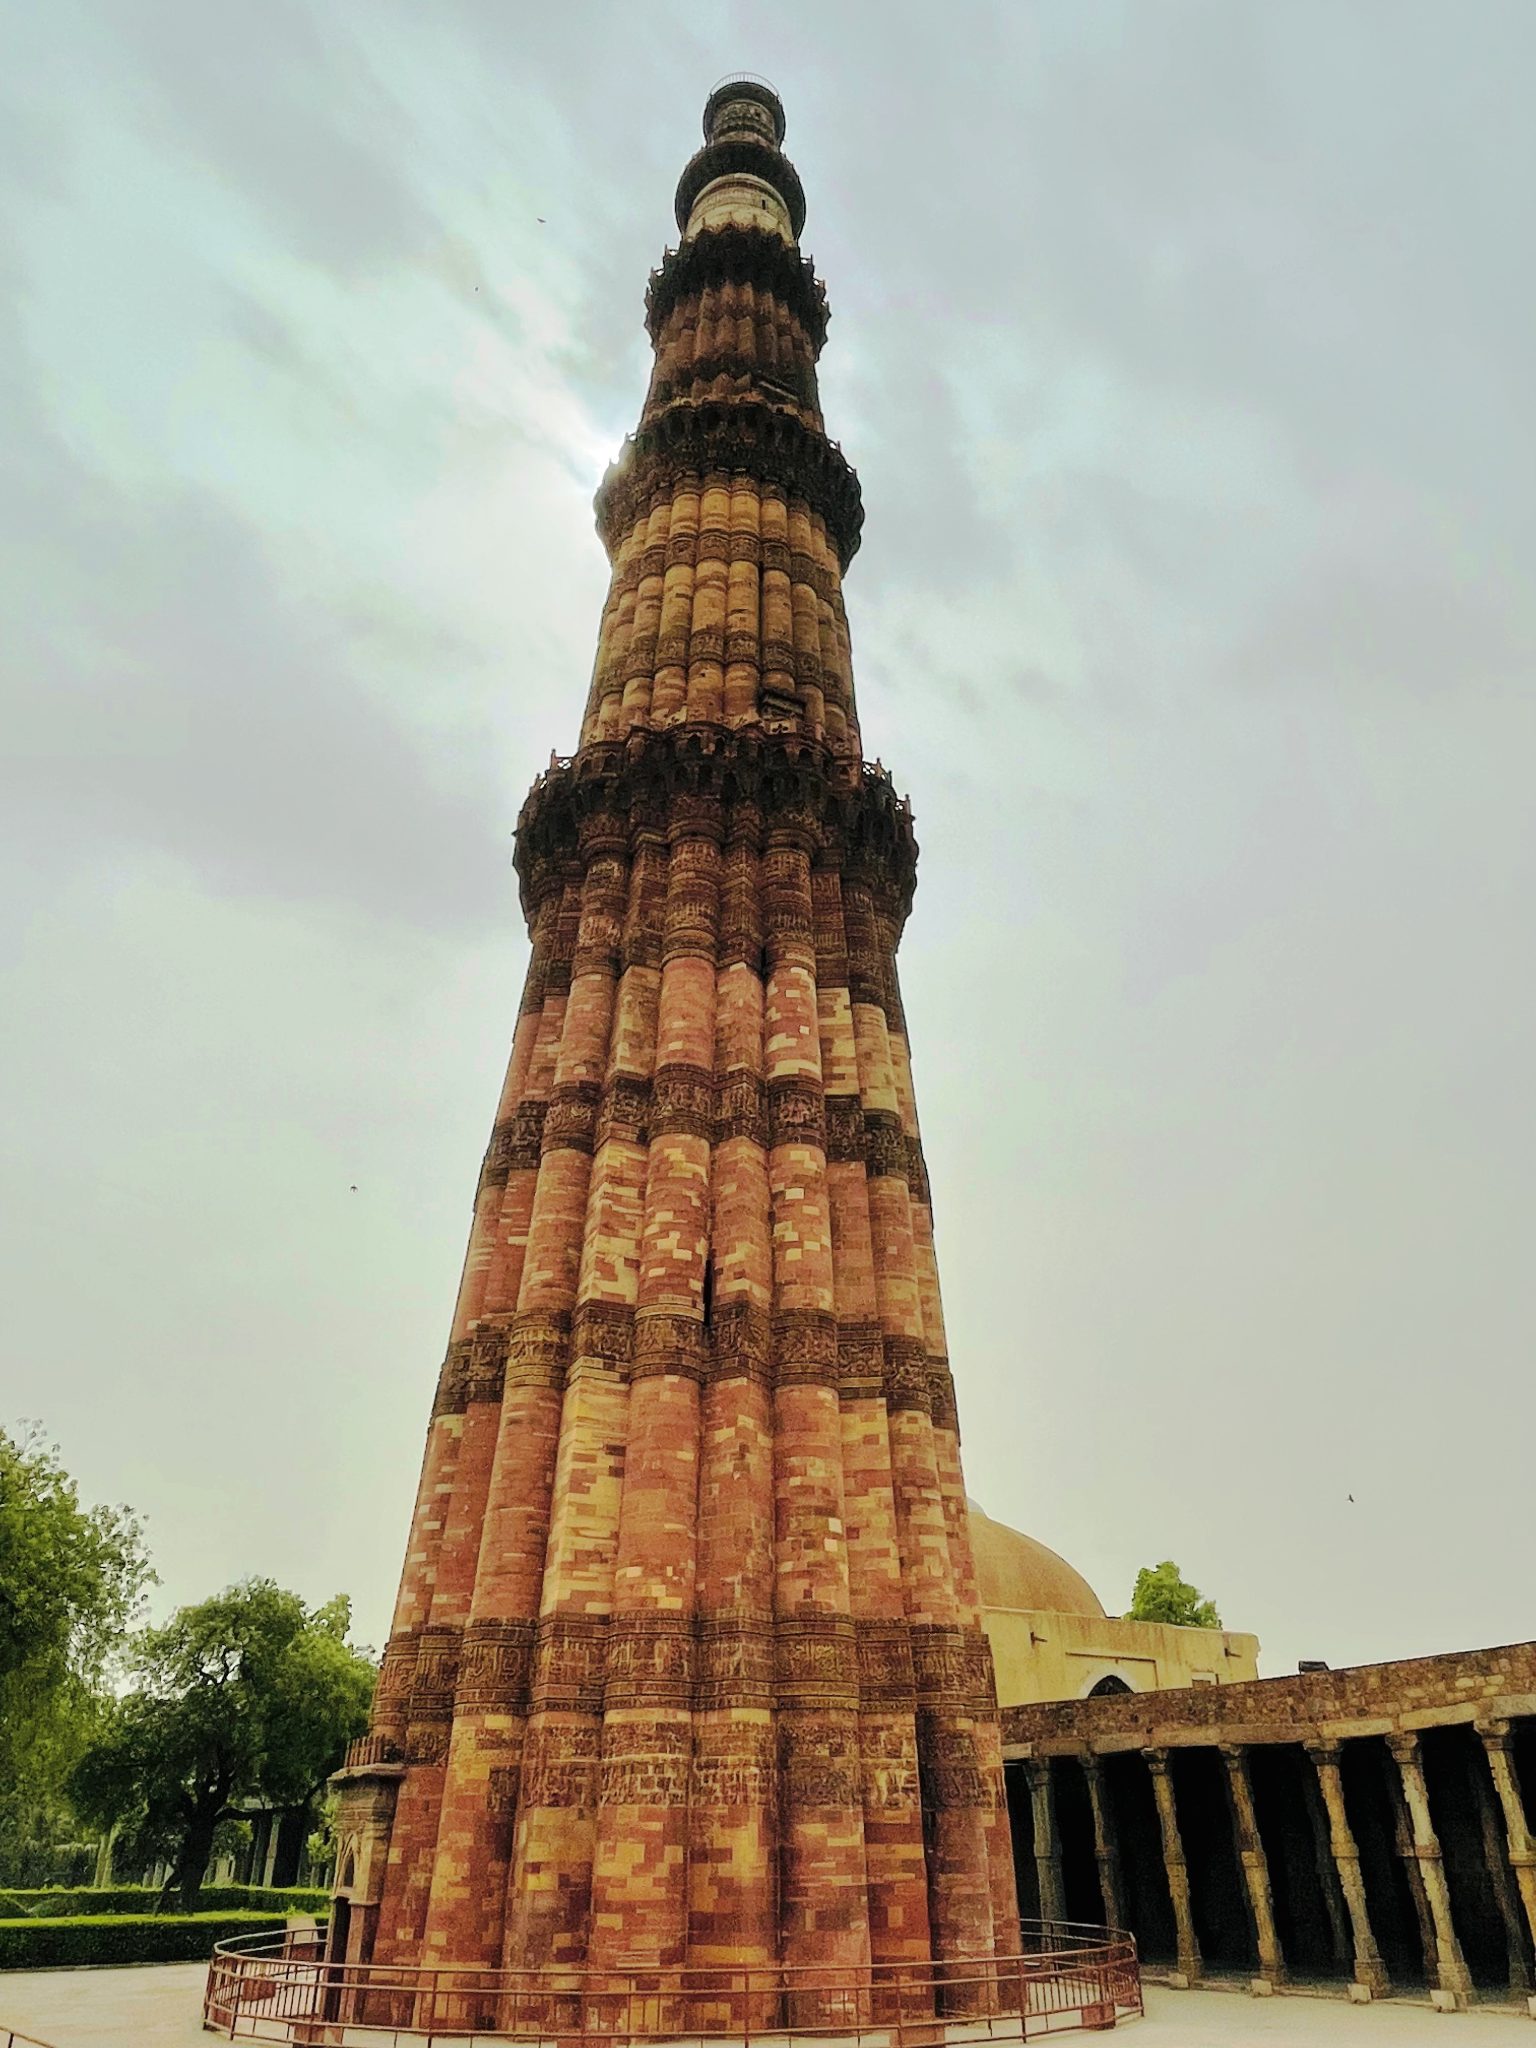 The Qutb Minar, Delhi, India. One of the major tourist attractions of Delhi. It is built in the early 13th century